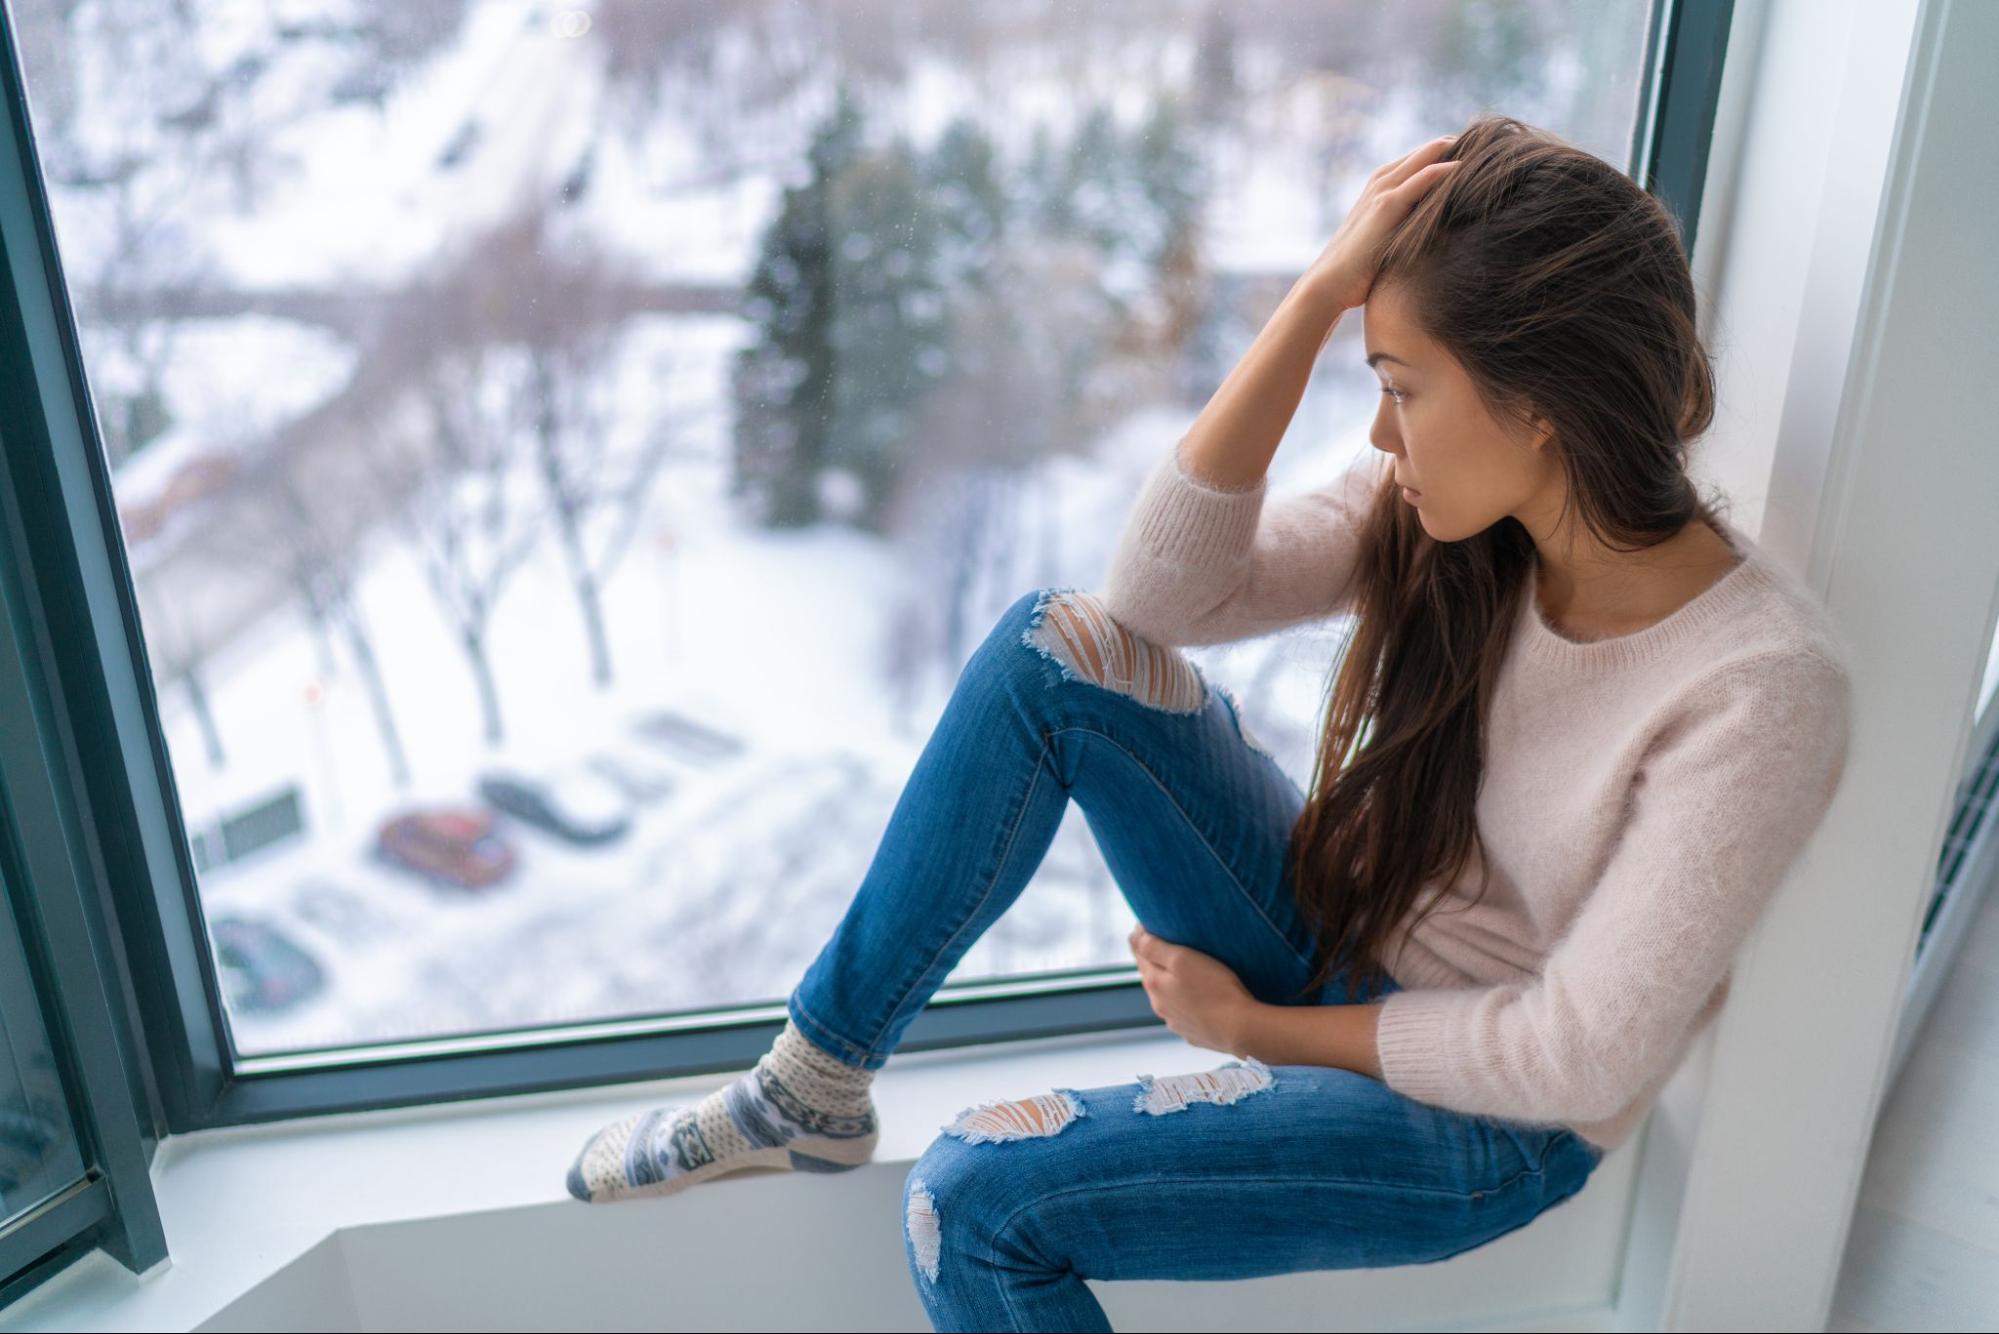 A woman feeling sad in winter to represent how to beat the winter blues